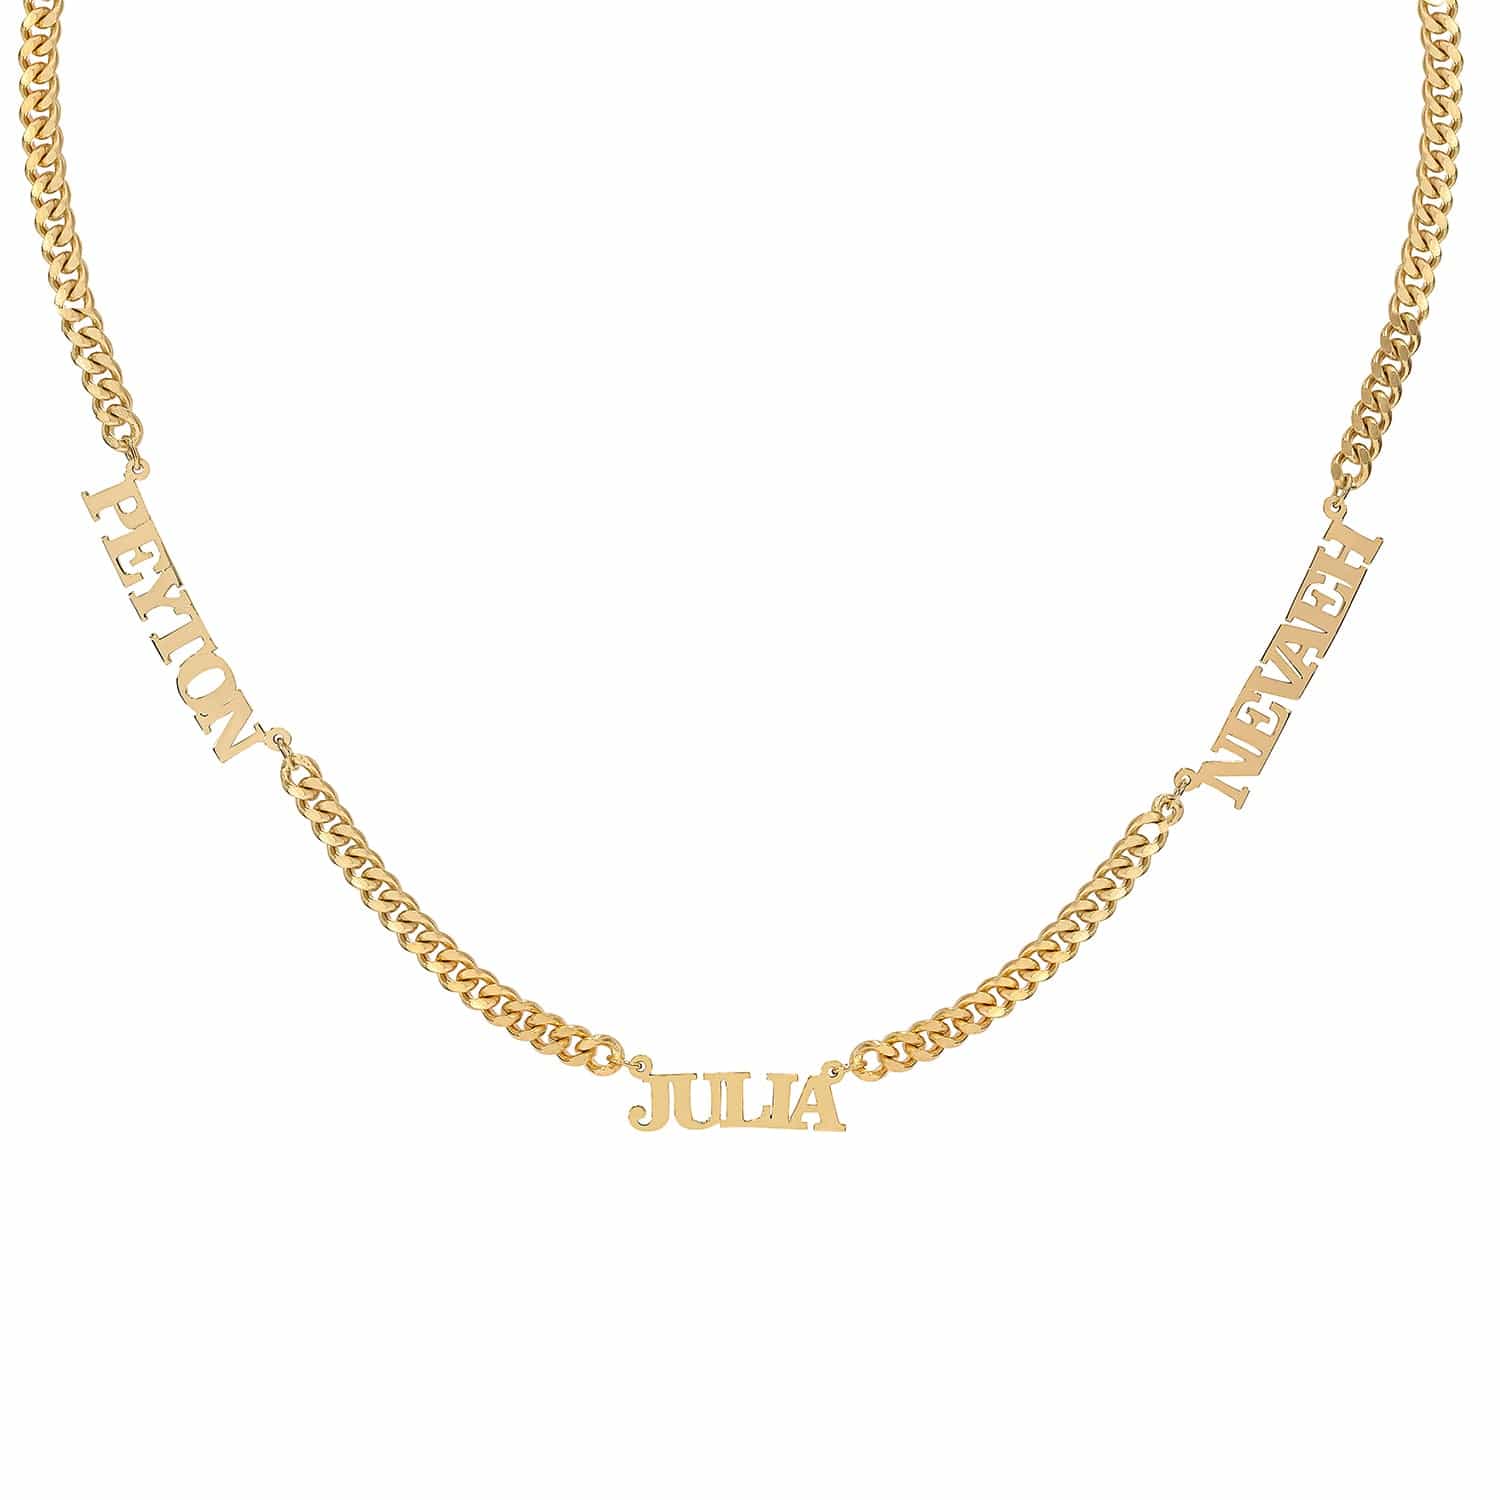 14k Gold over Sterling Silver / Cuban Chain Personalized Nameplate Necklace w/ Three Names on Cuban Chain